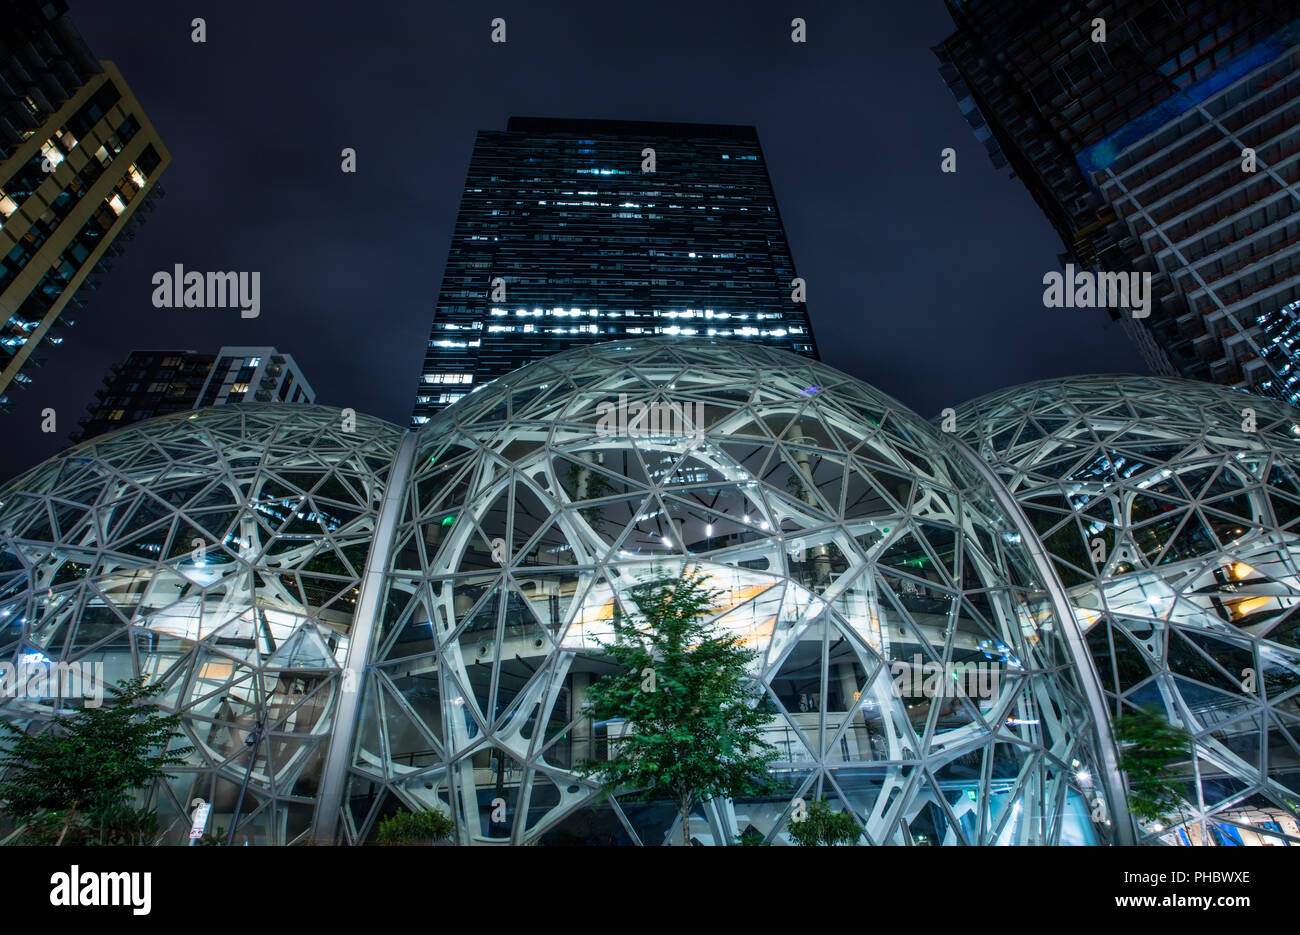 The Spheres at Amazon World Headquarters at night Stock Photo